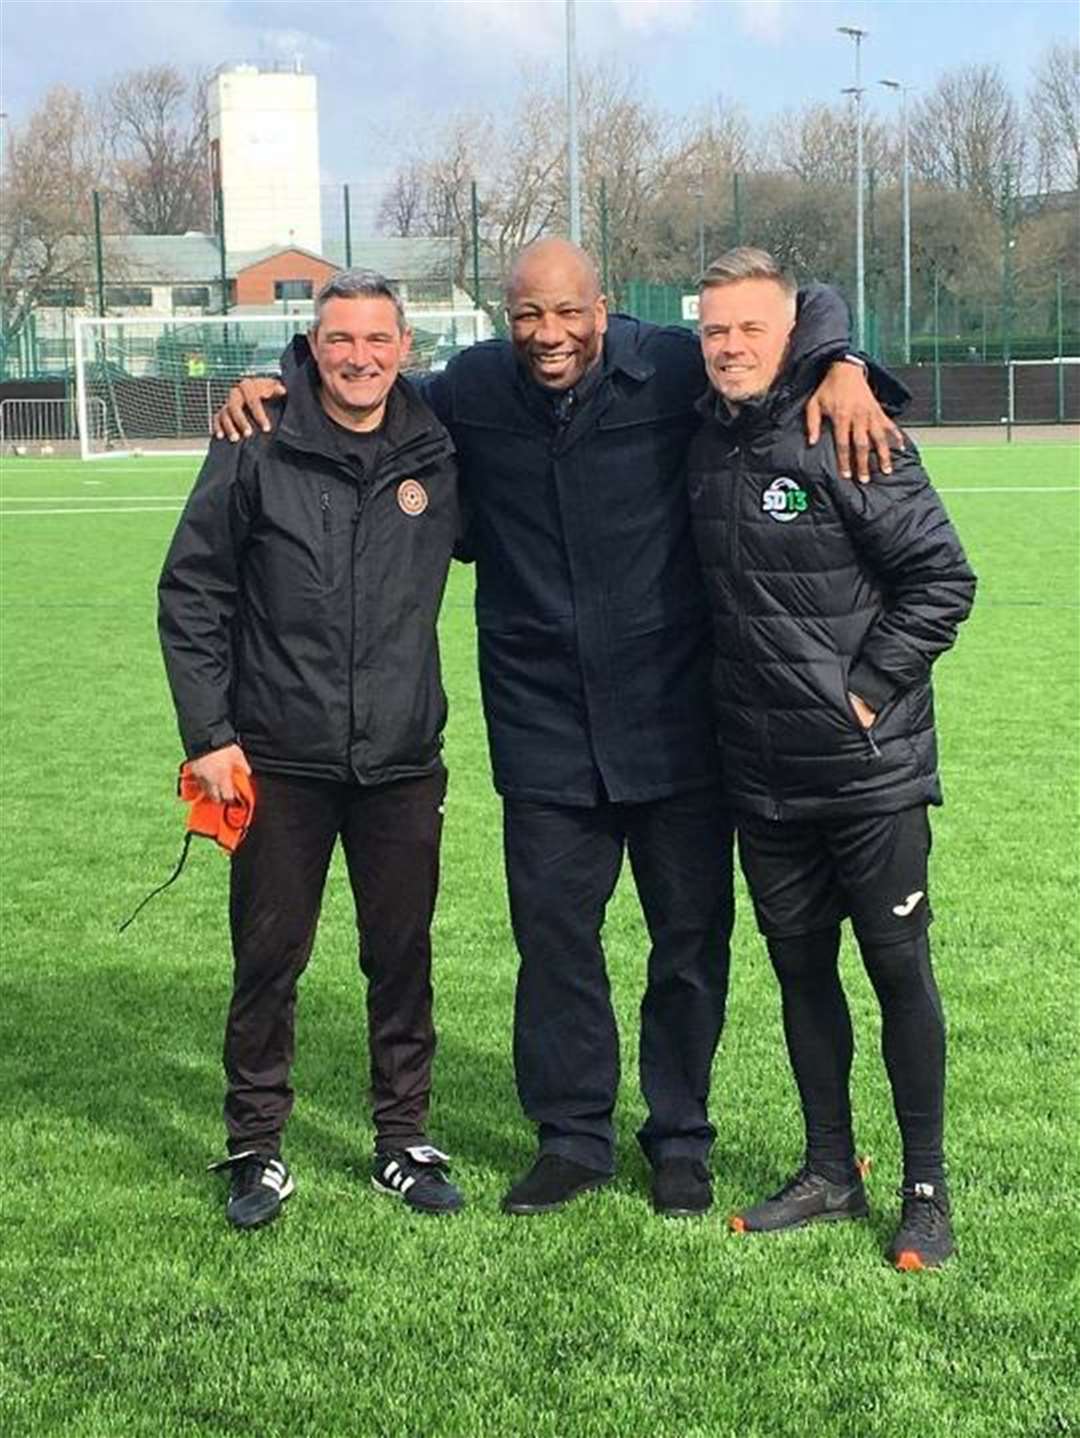 Former Rangers star Charlie Miller (left) and ex-Celtic striker Simon Donelly (right) are pictured with another Rangers old boy Marvin Andrews. Miller and Donnelly will be in Thurso this summer to help run a soccer school.